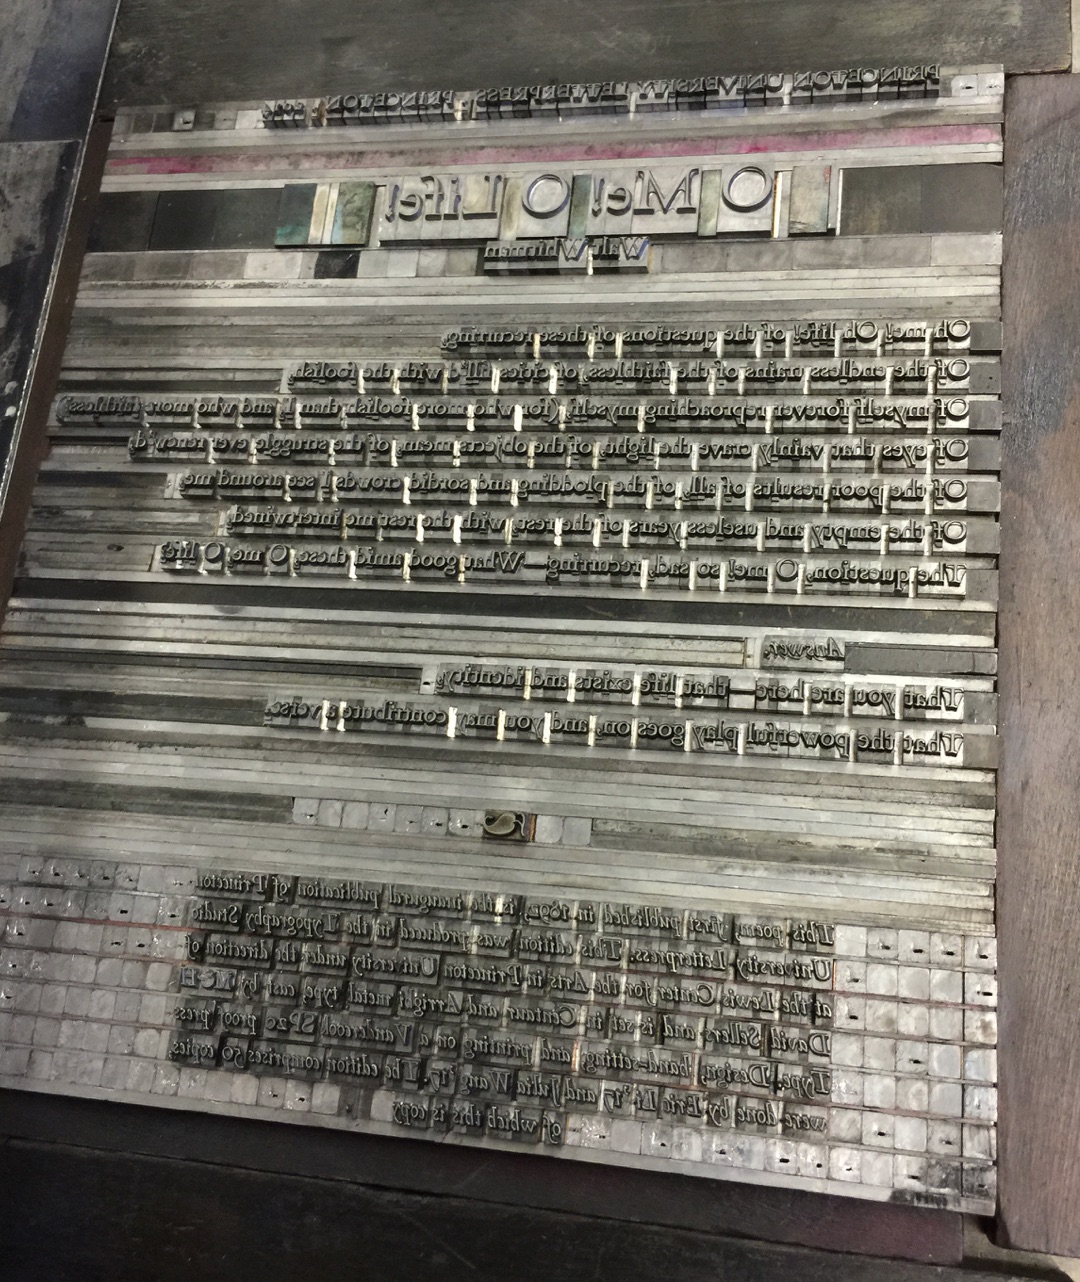 A “lockup” of metal type, describing the frame holding forms together. We still use this phrase to refer to design layouts.